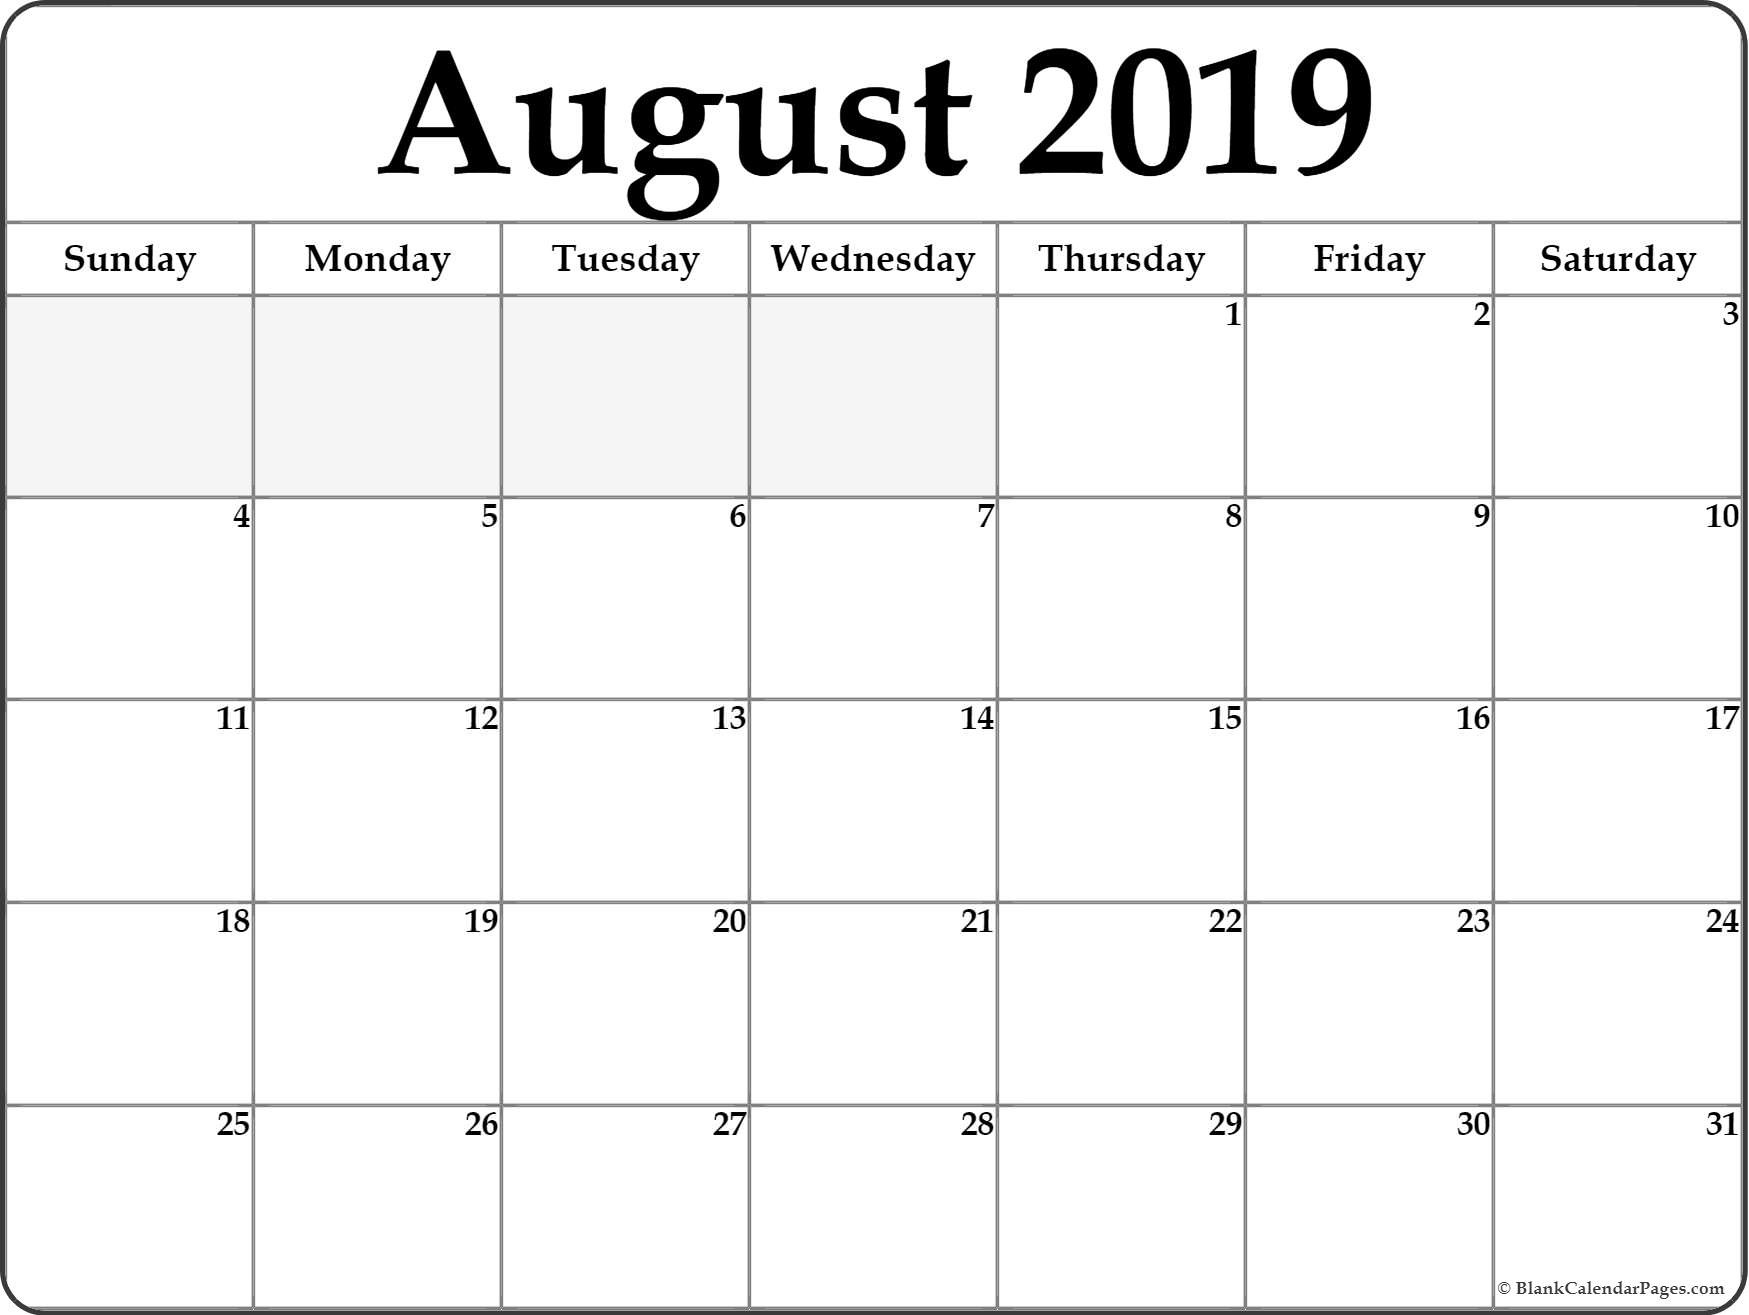 August 2019 Calendar | Free Printable Monthly Calendars-Blank Calendar To Fill In